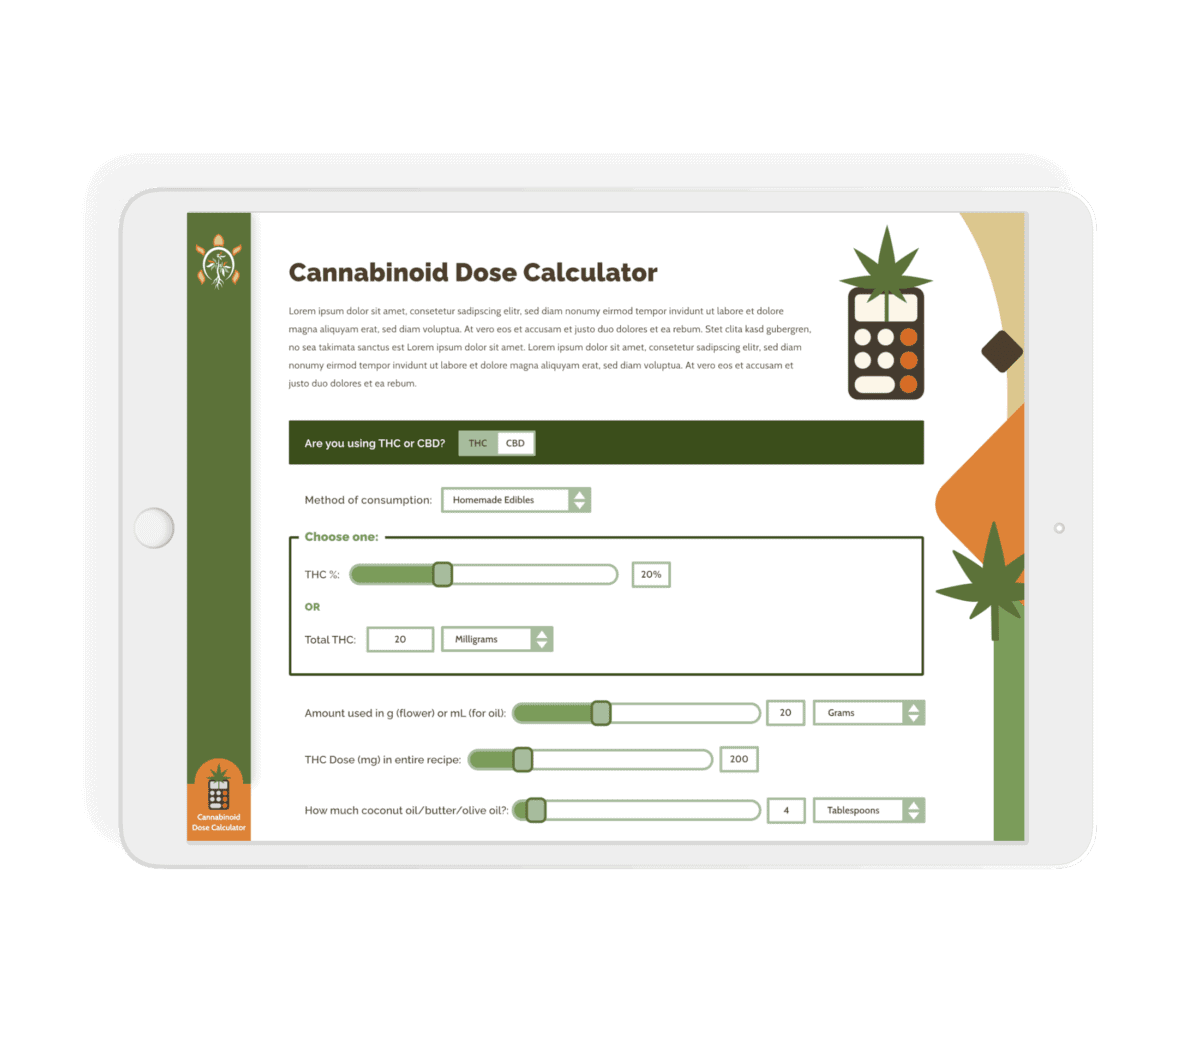 An iPad mockup of the NWAC Cannabinoid Dose Calculator. The calculator features options for THC or CBD, including a percentage or total THC in milligrams, amount used in grams or millilitres, and an option for how much coconut oil/butter/olive oil.